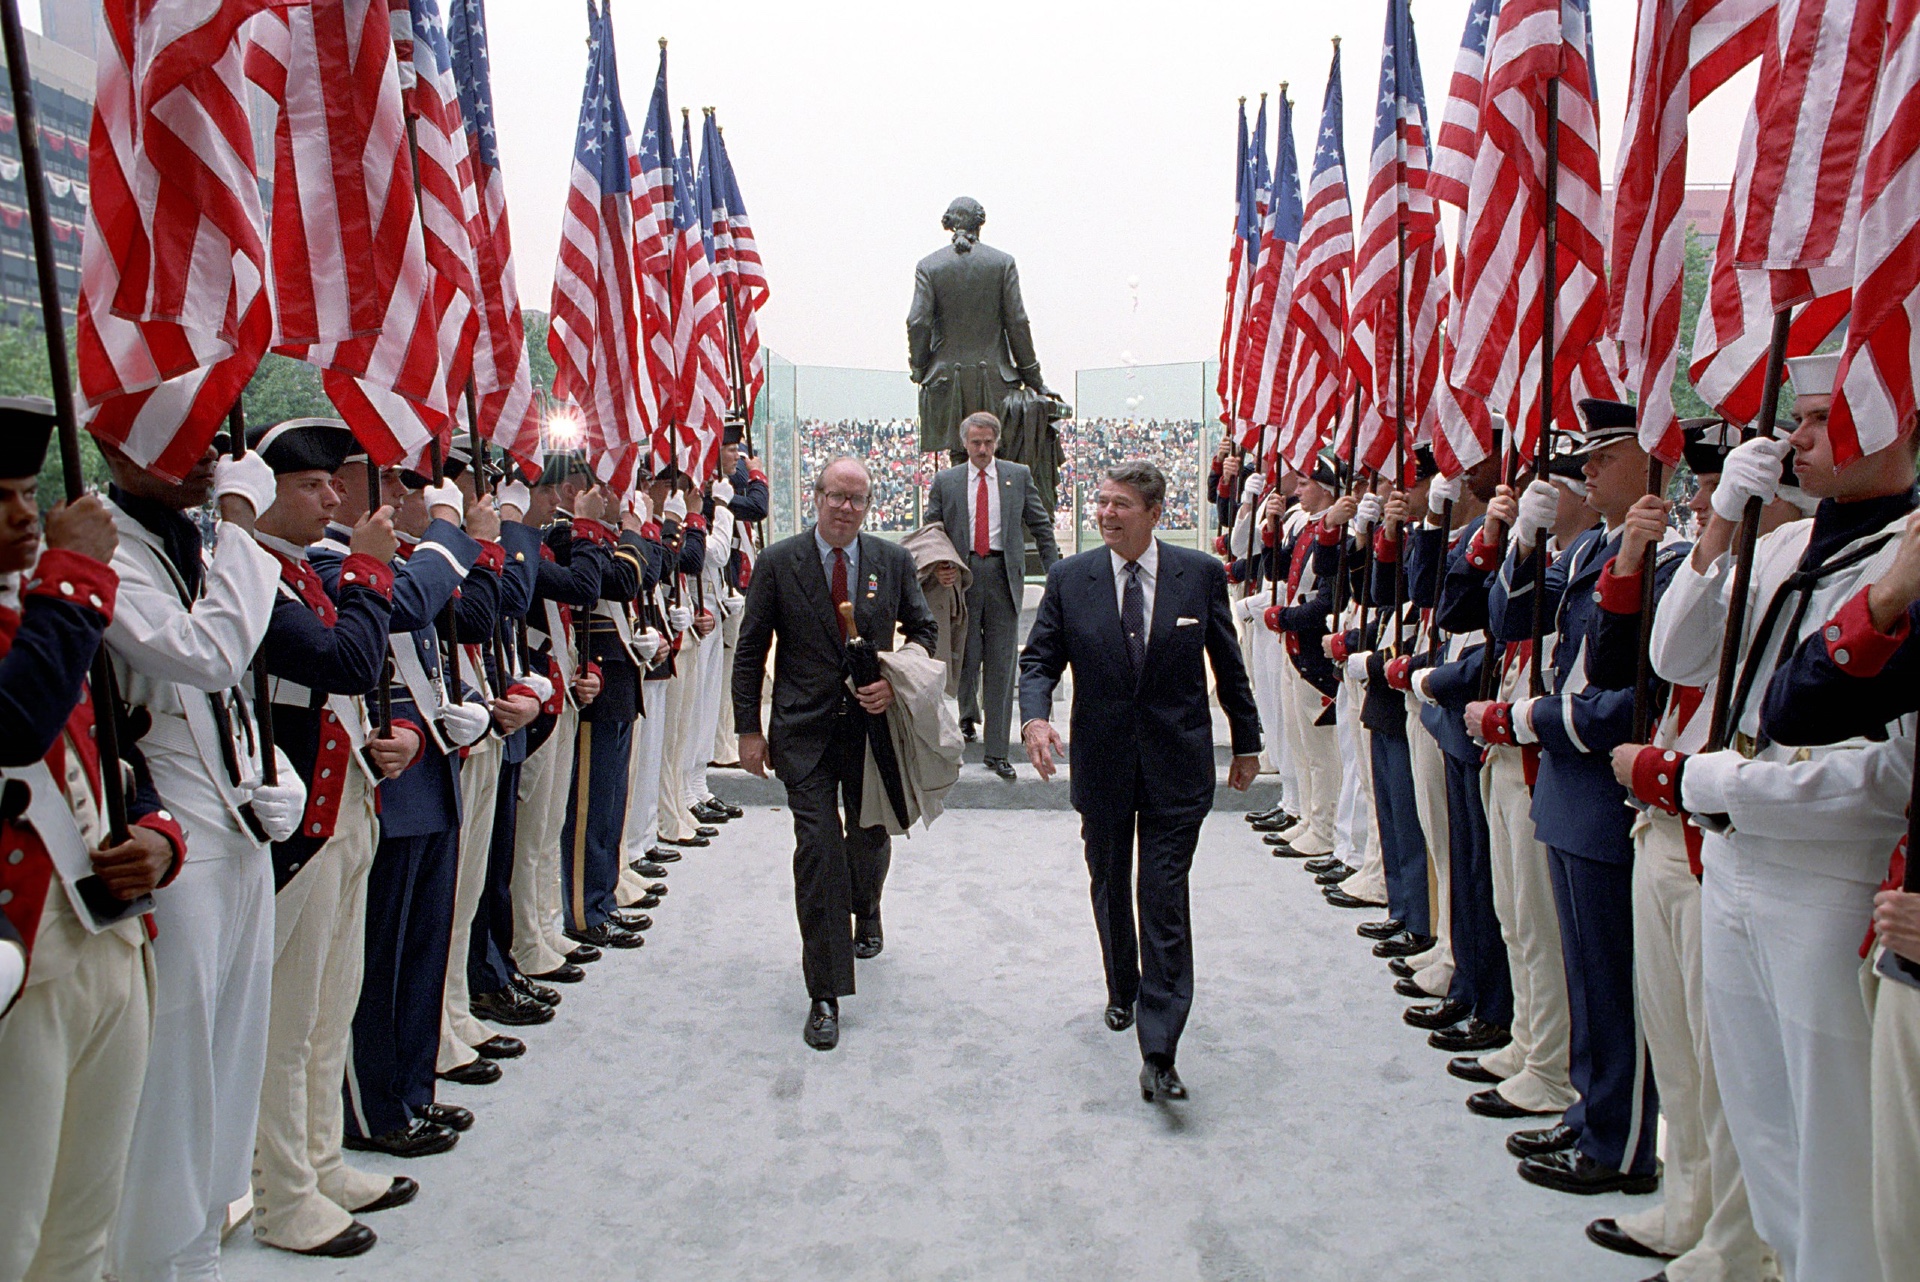 resident Ronald Reagan During a Trip to Philadelphia, Pennsylvania to Attend a "We The People" Bicentennial Celebration of The Constitution at Independence Hall Passing Through a Military Honor Guard